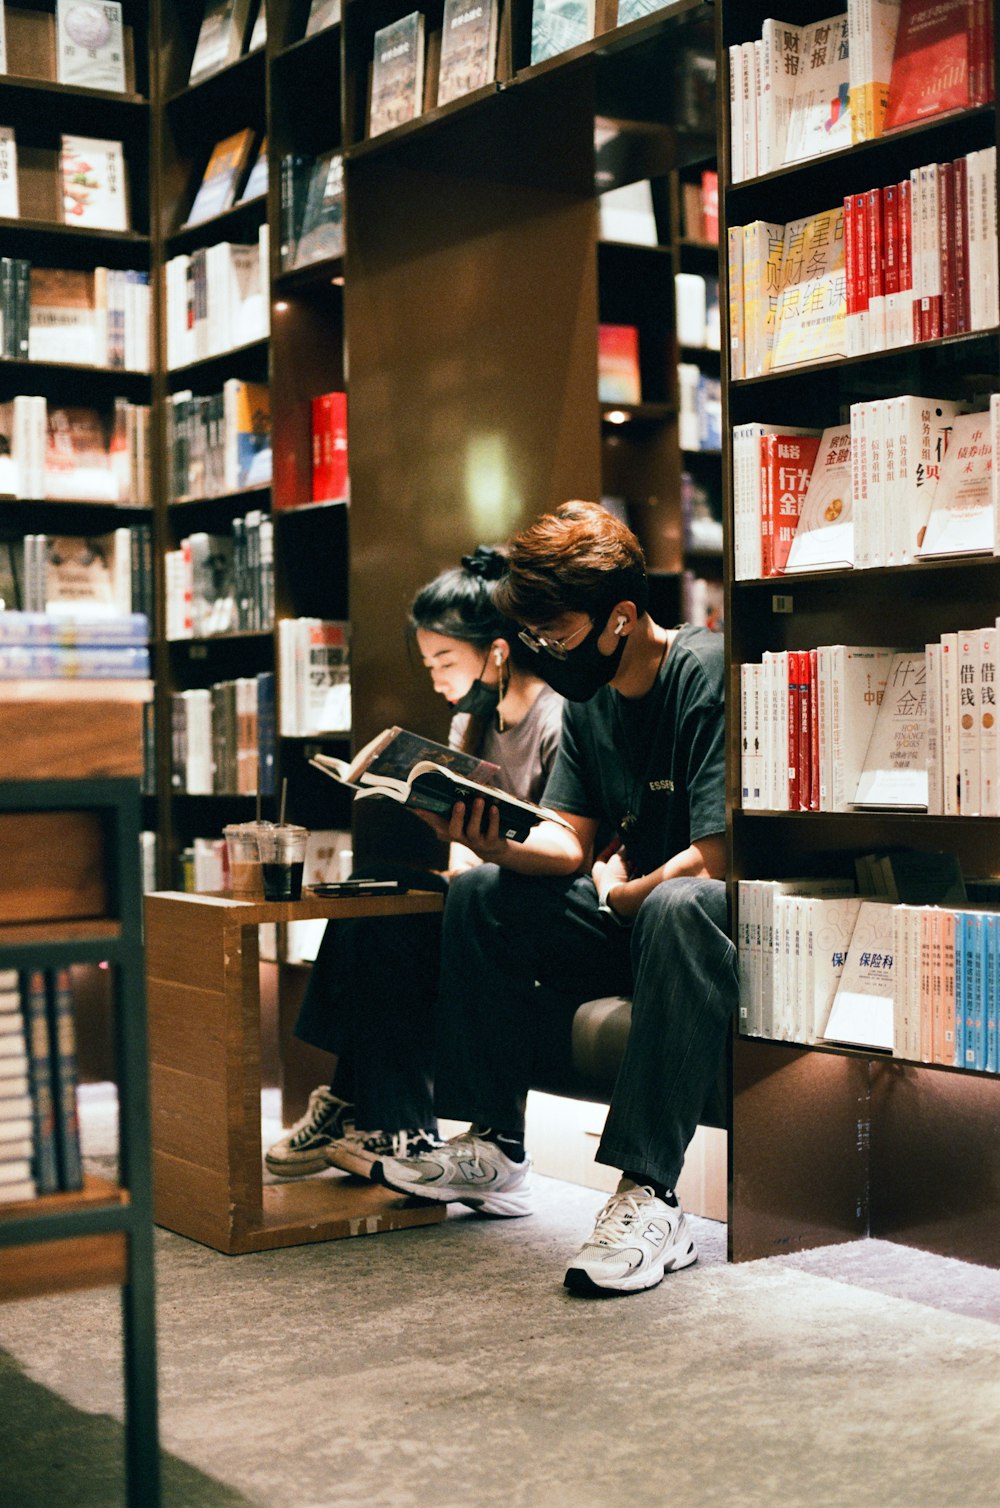 two people sitting on a bench in front of a bookshelf